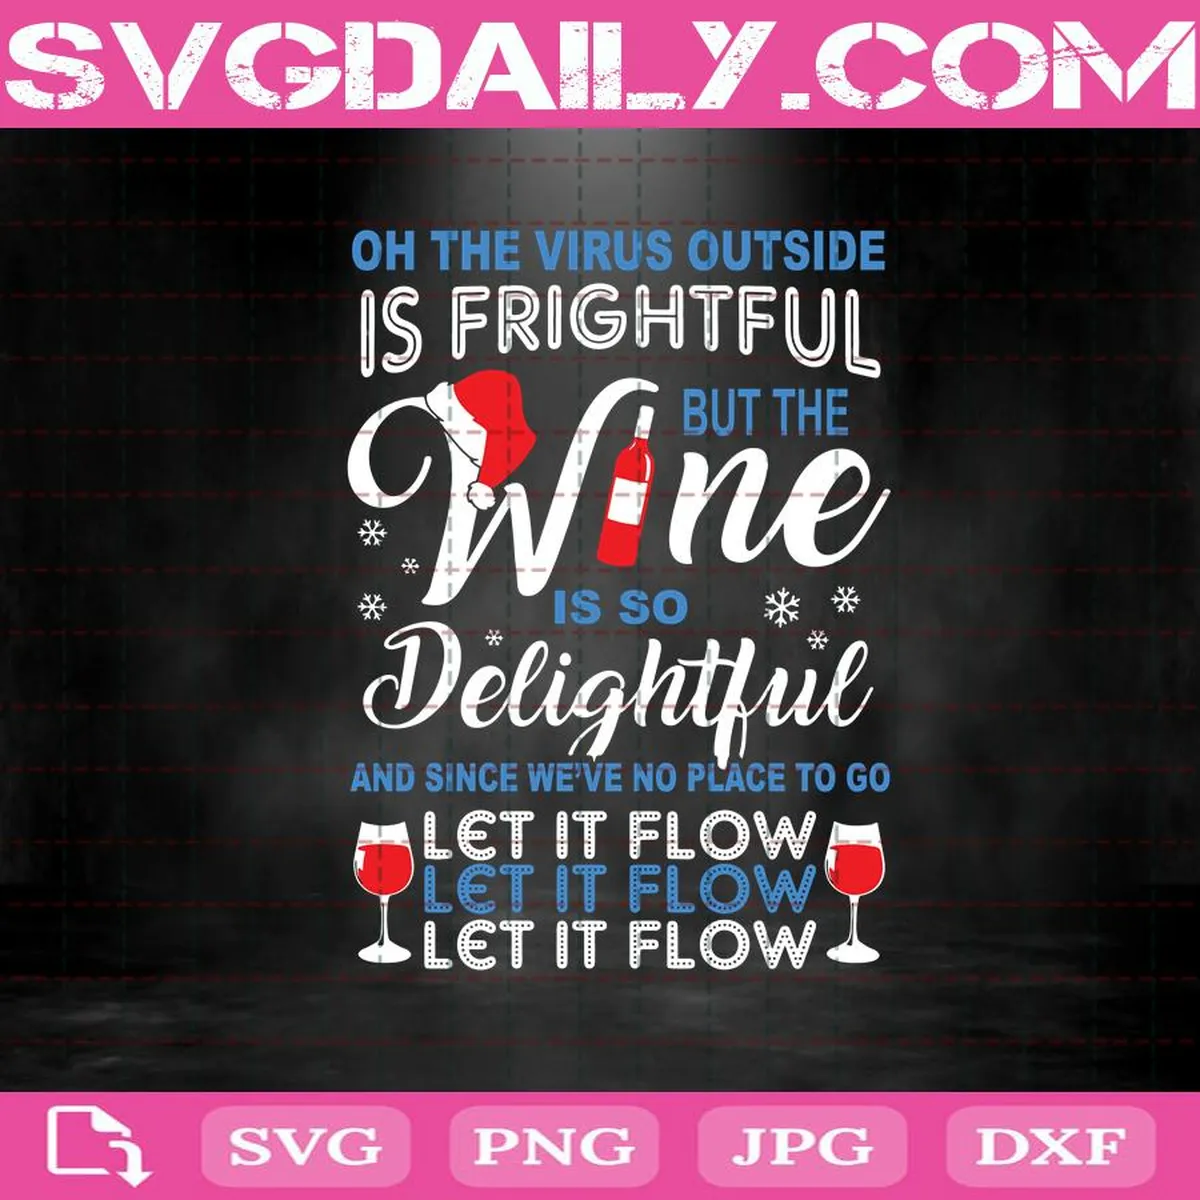 Oh The Viruts Outside Is Frightful But The Wine Is So Delightful Svg, Since We've No Place To Go Let It Flow Svg